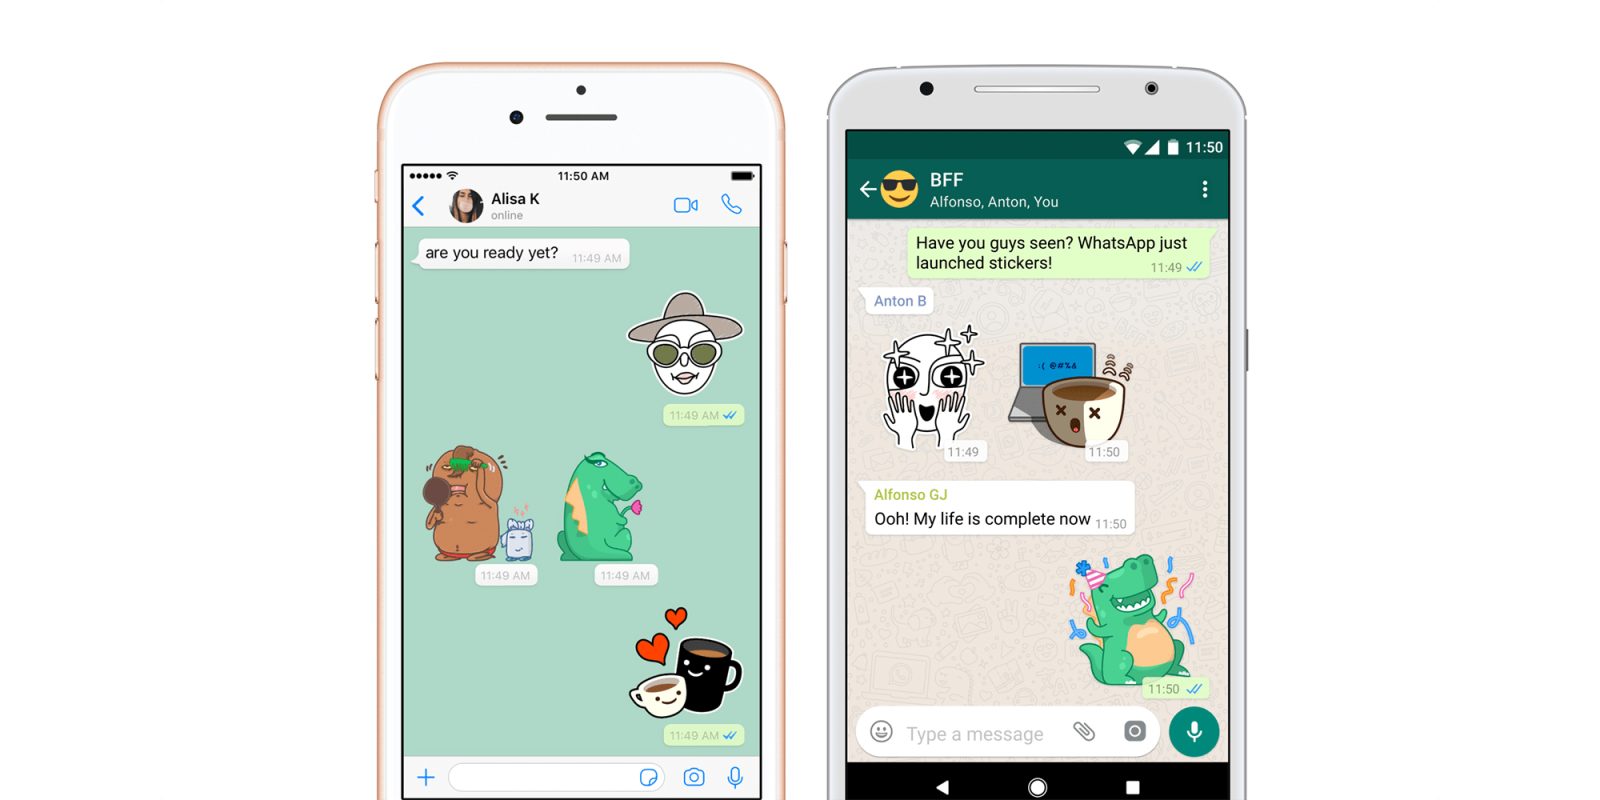 Whatsapp Stickers Are Finally Here 9to5google